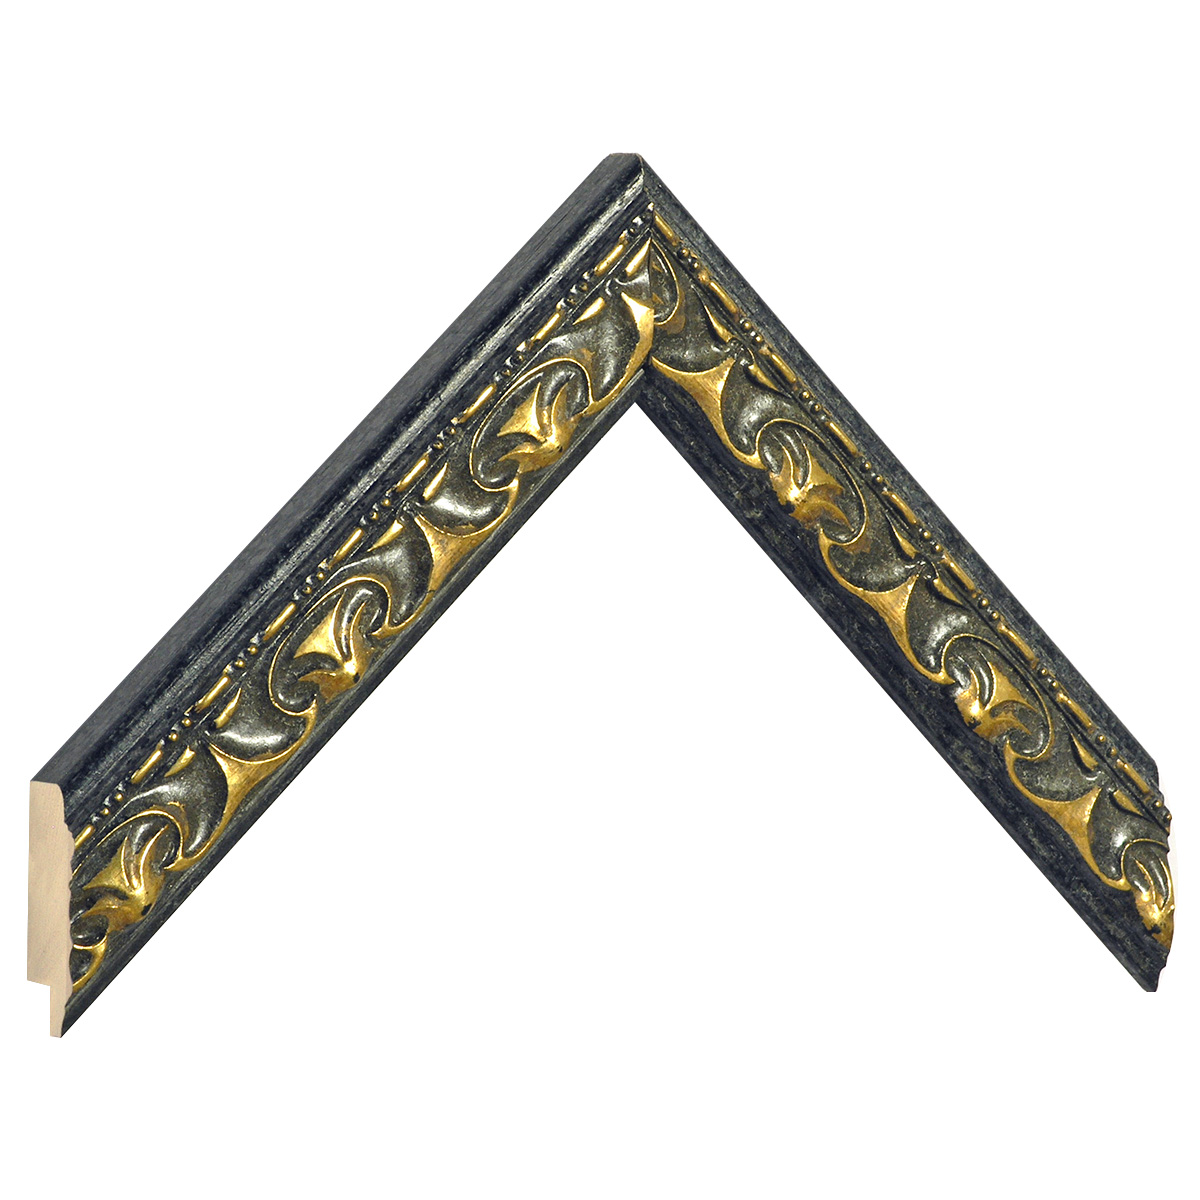 Moulding ayous black with golden relief decorations - Sample